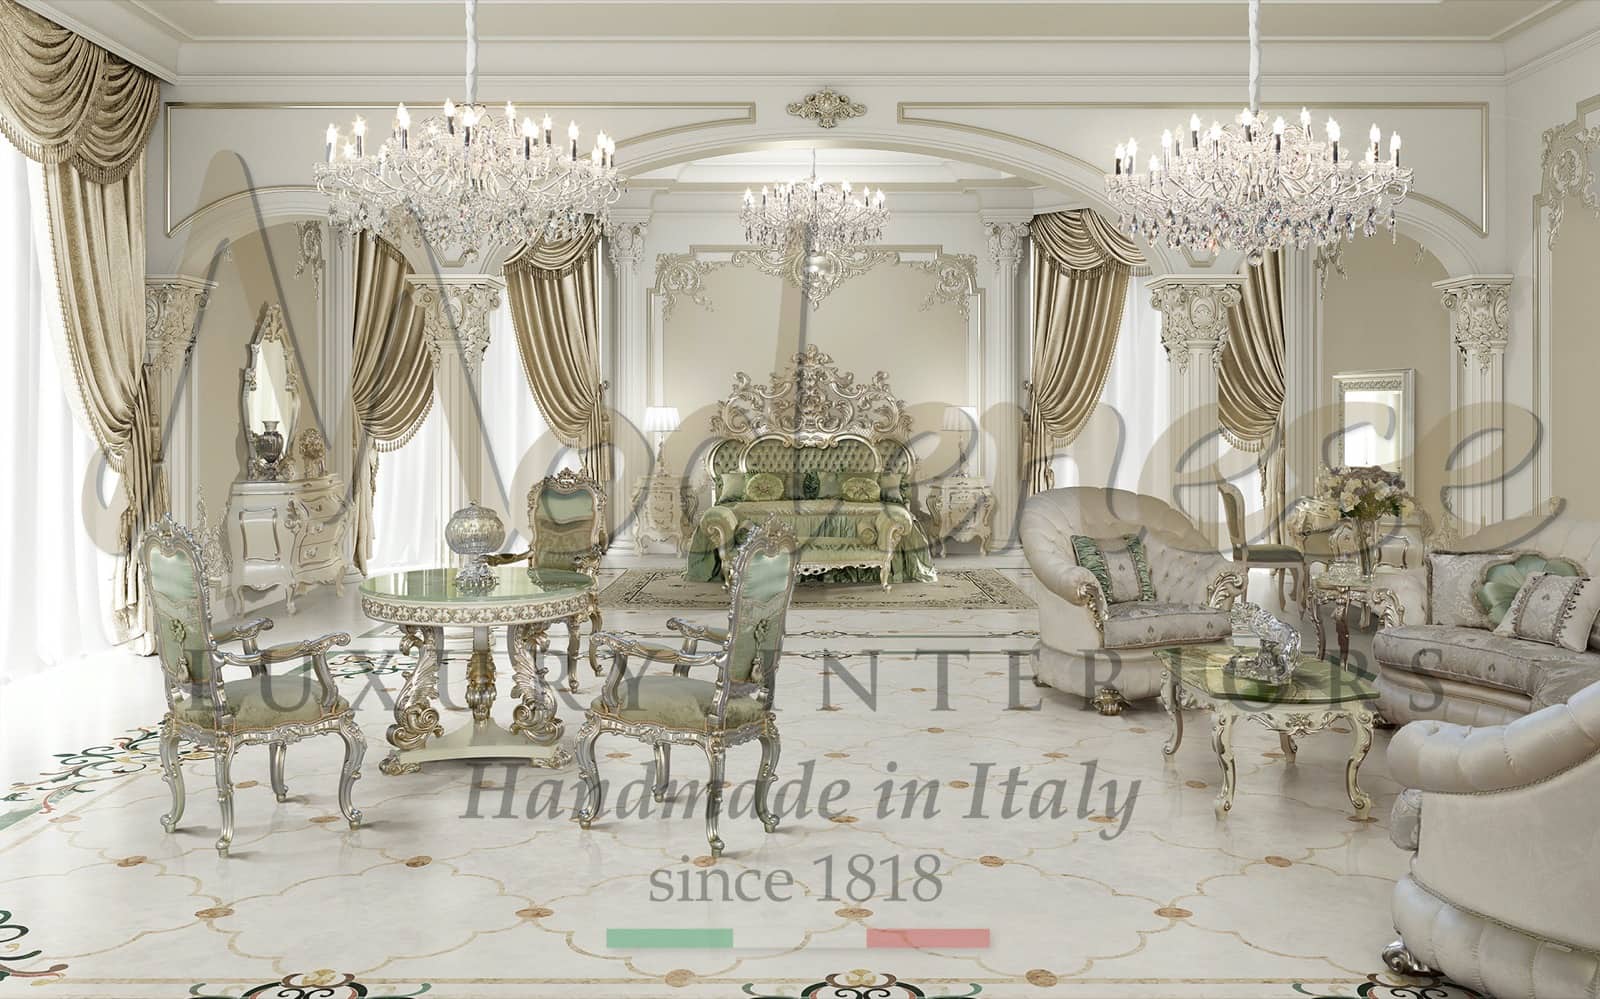 style of interiors to complete your luxury interior design project master bedroom with classic baroque handmade furniture timeless and quality made in Italy customized ideas for unique interiors in classic style